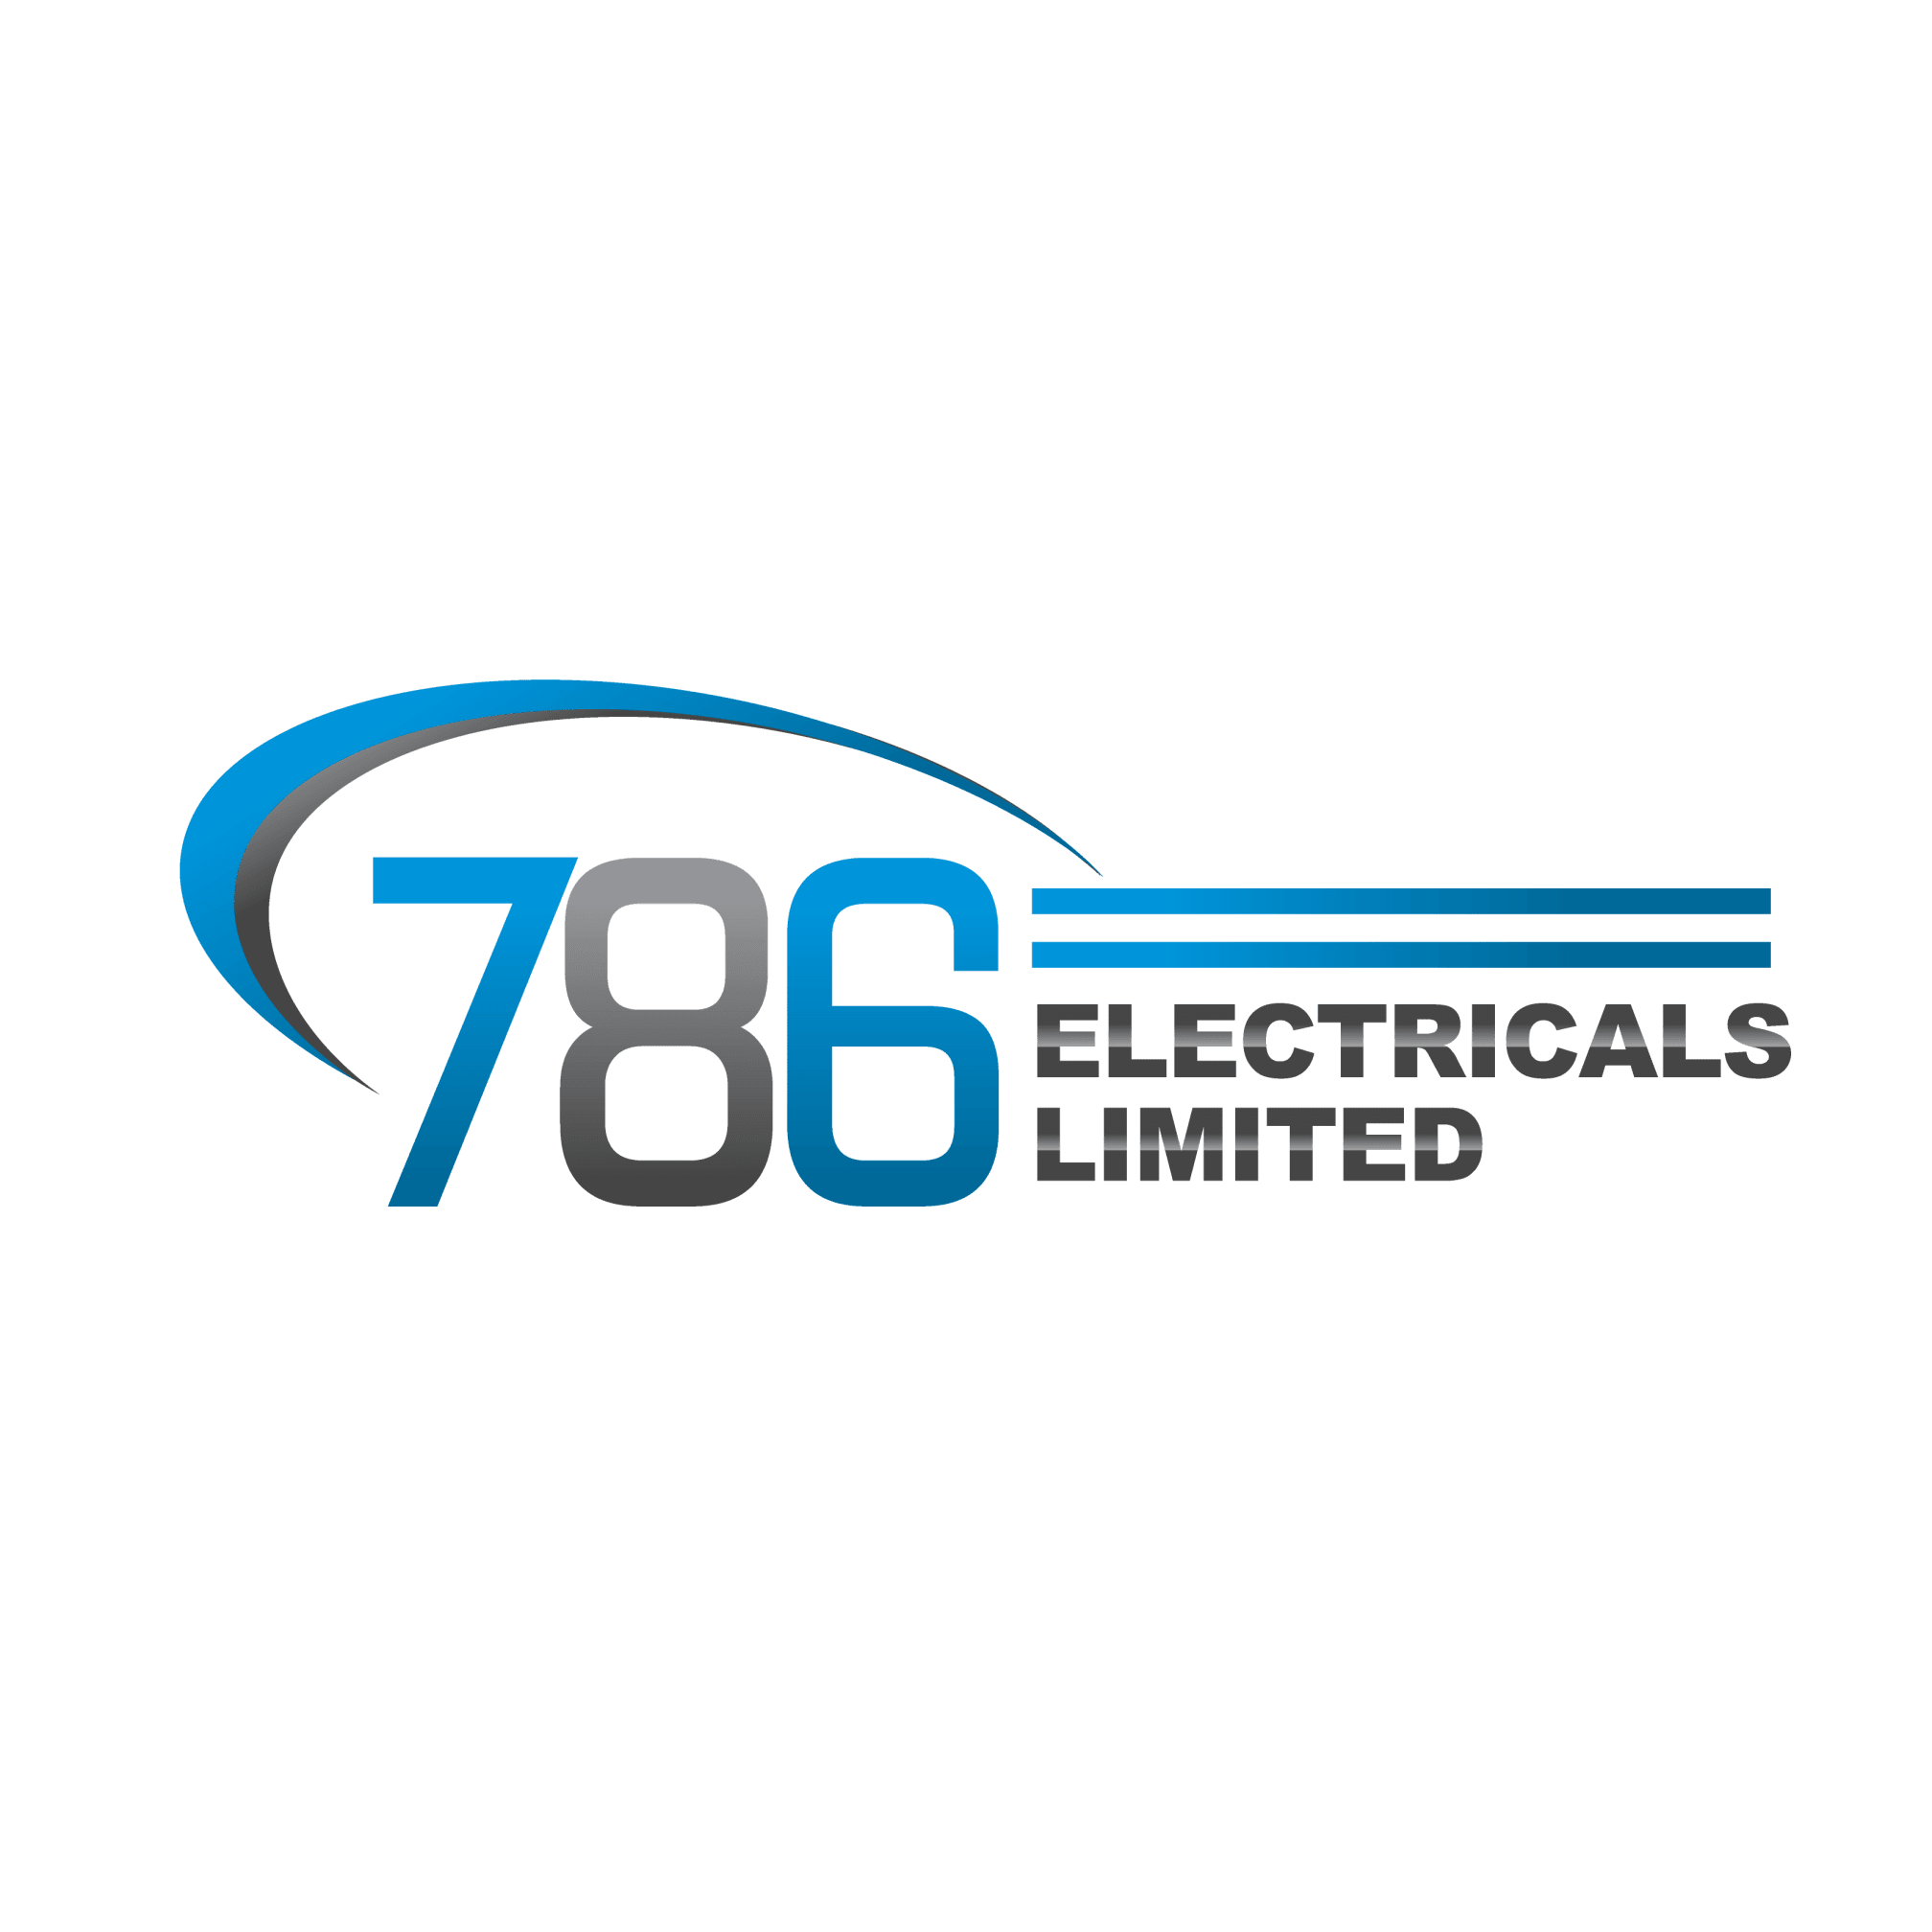 786 Electricals Ltd - Leicester, Leicestershire LE4 9FR - 07584 321989 | ShowMeLocal.com